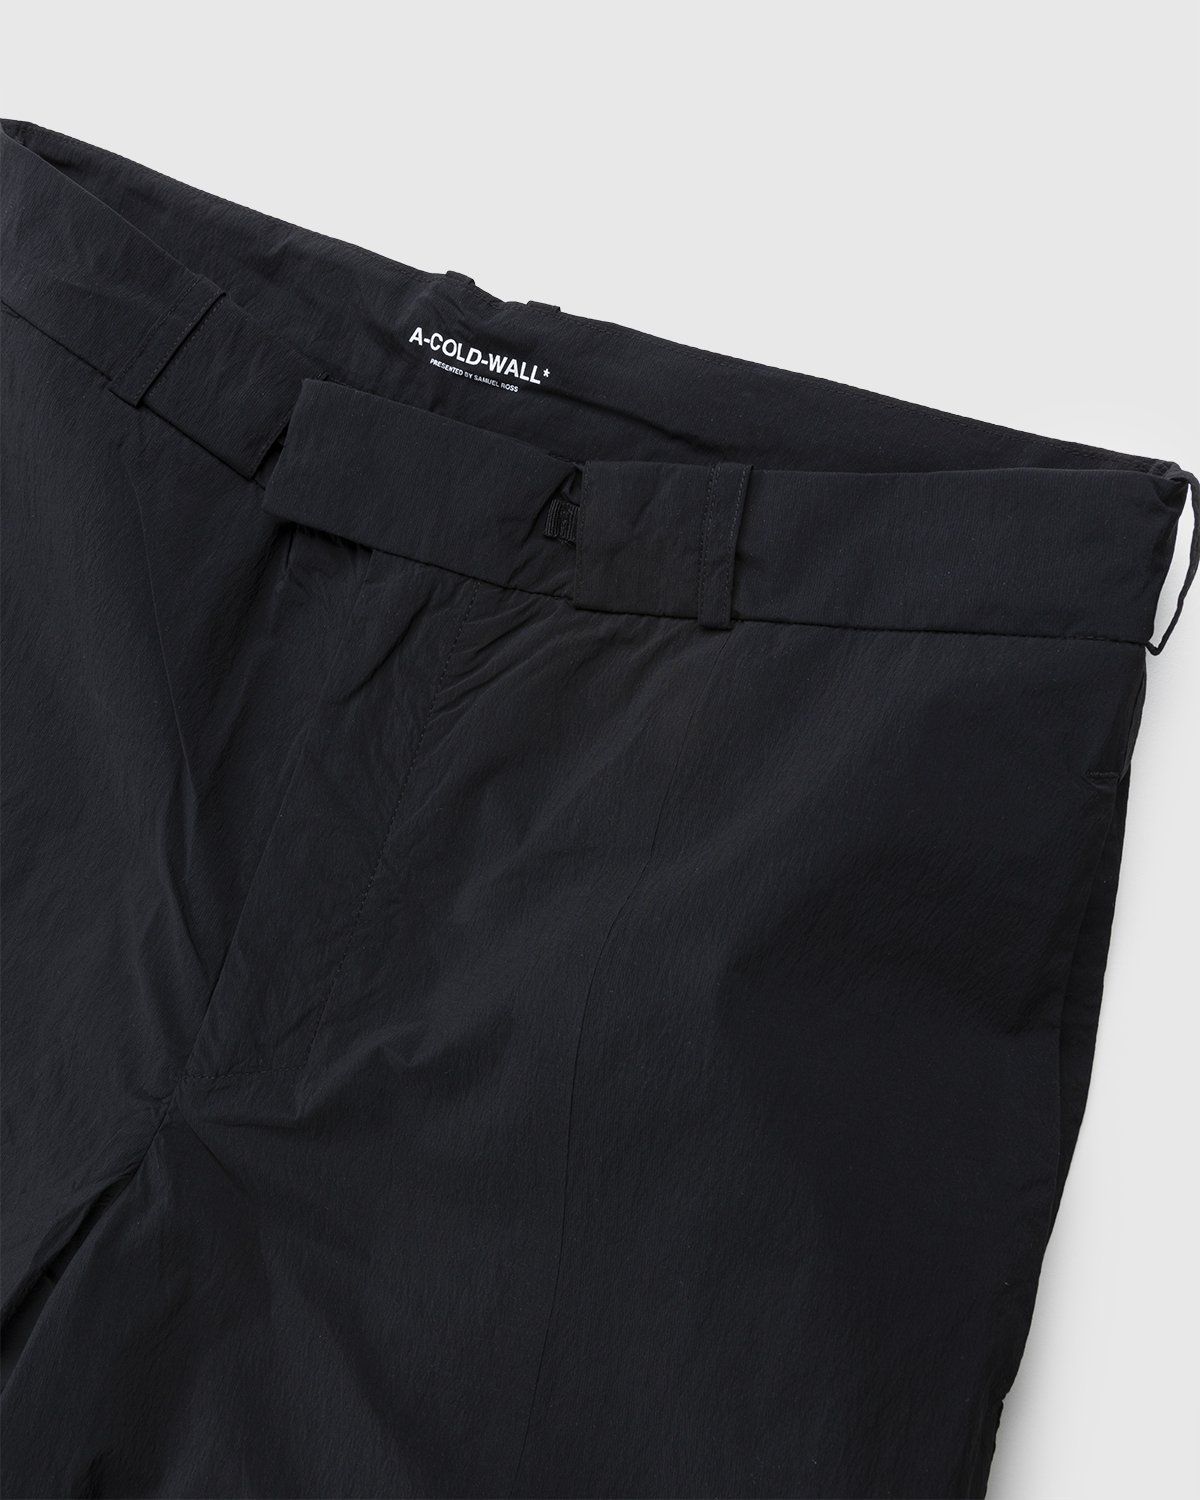 A-Cold-Wall* – Stealth Nylon Pants Black - Trousers - Black - Image 4